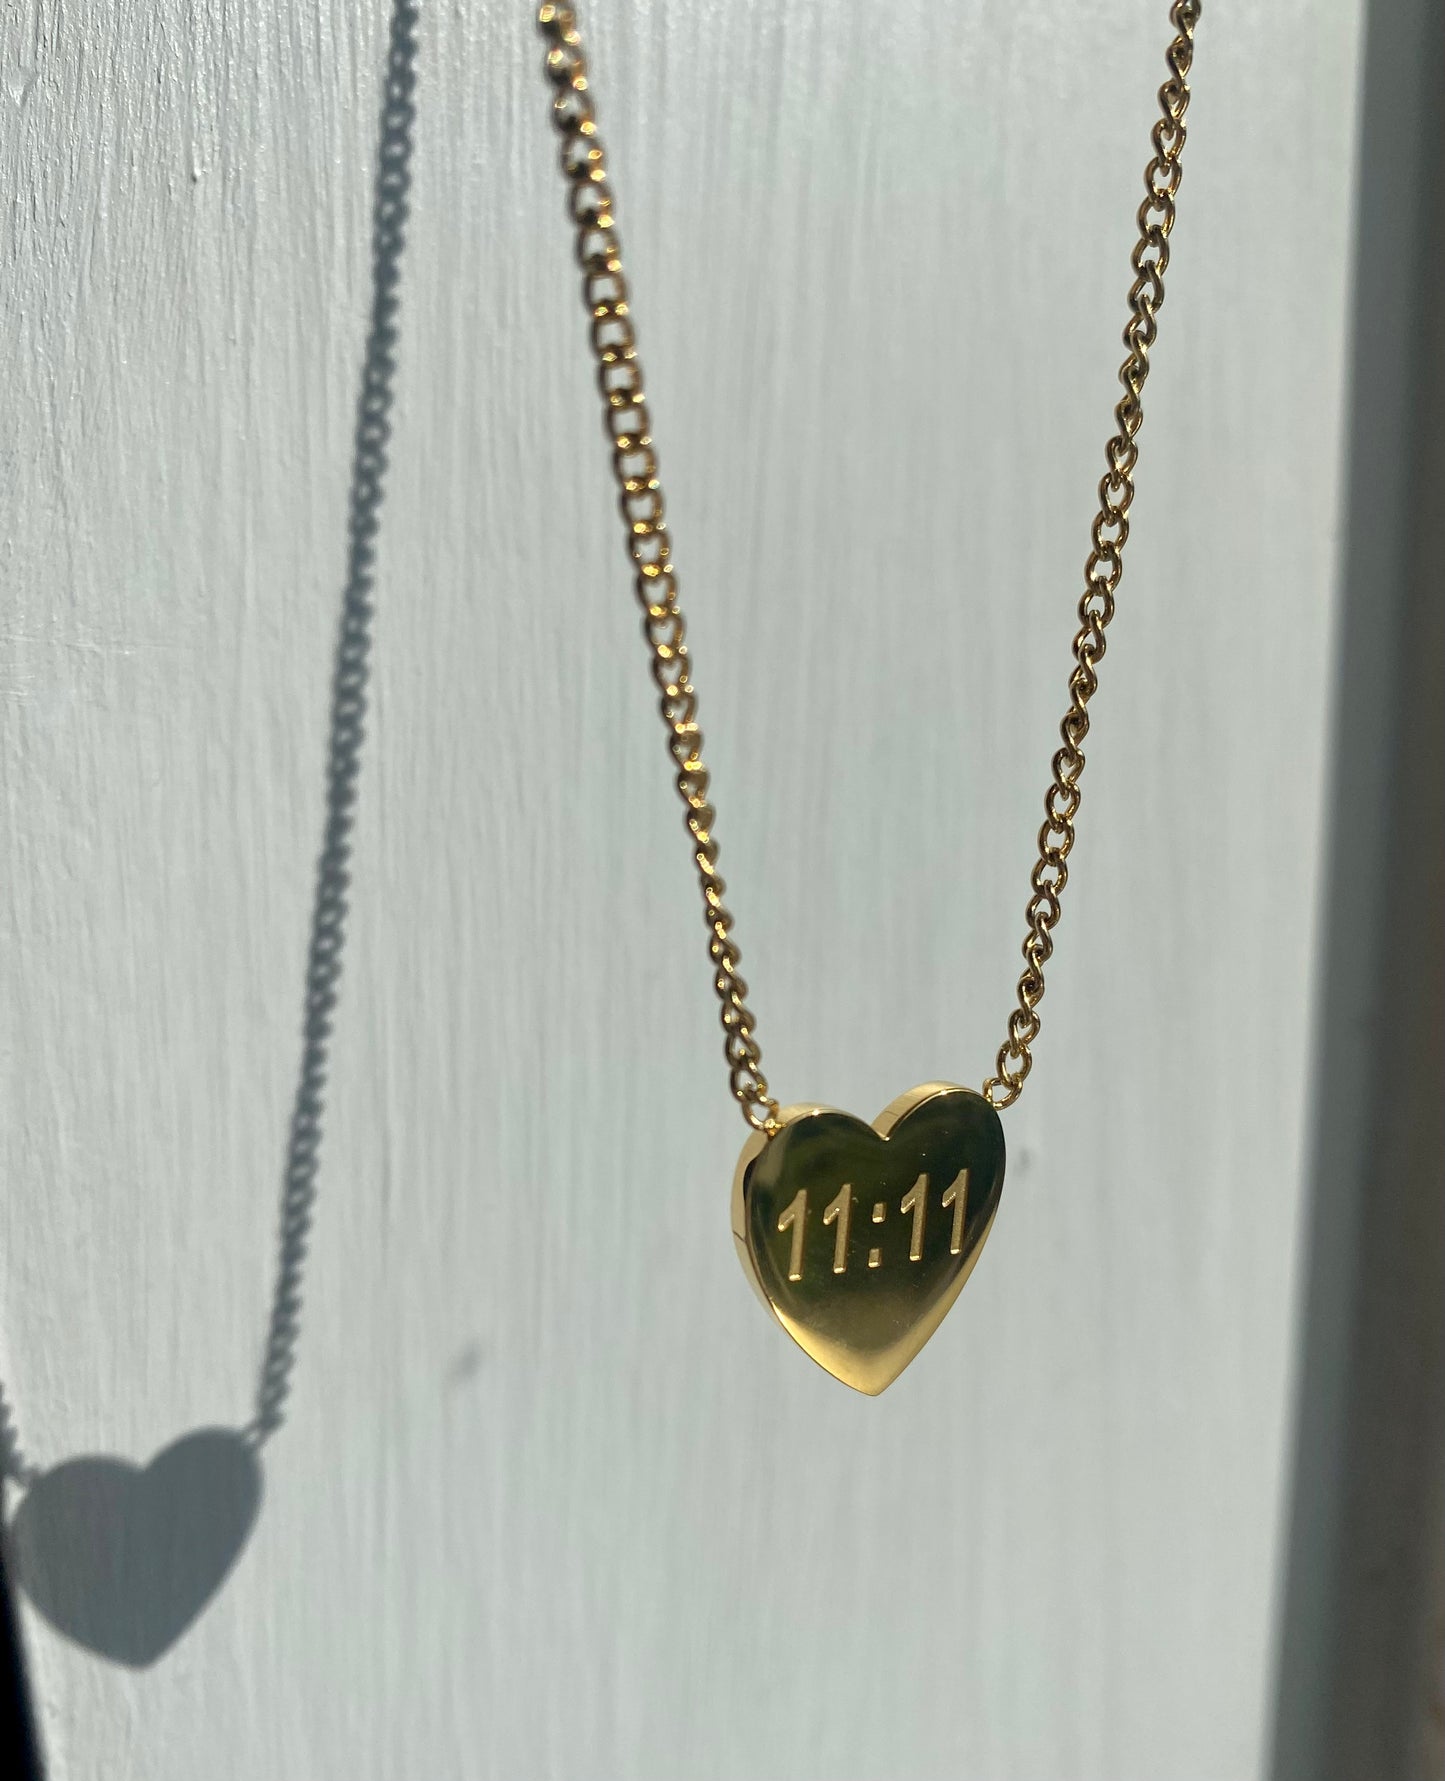 11:11 18k Gold Plated Necklace